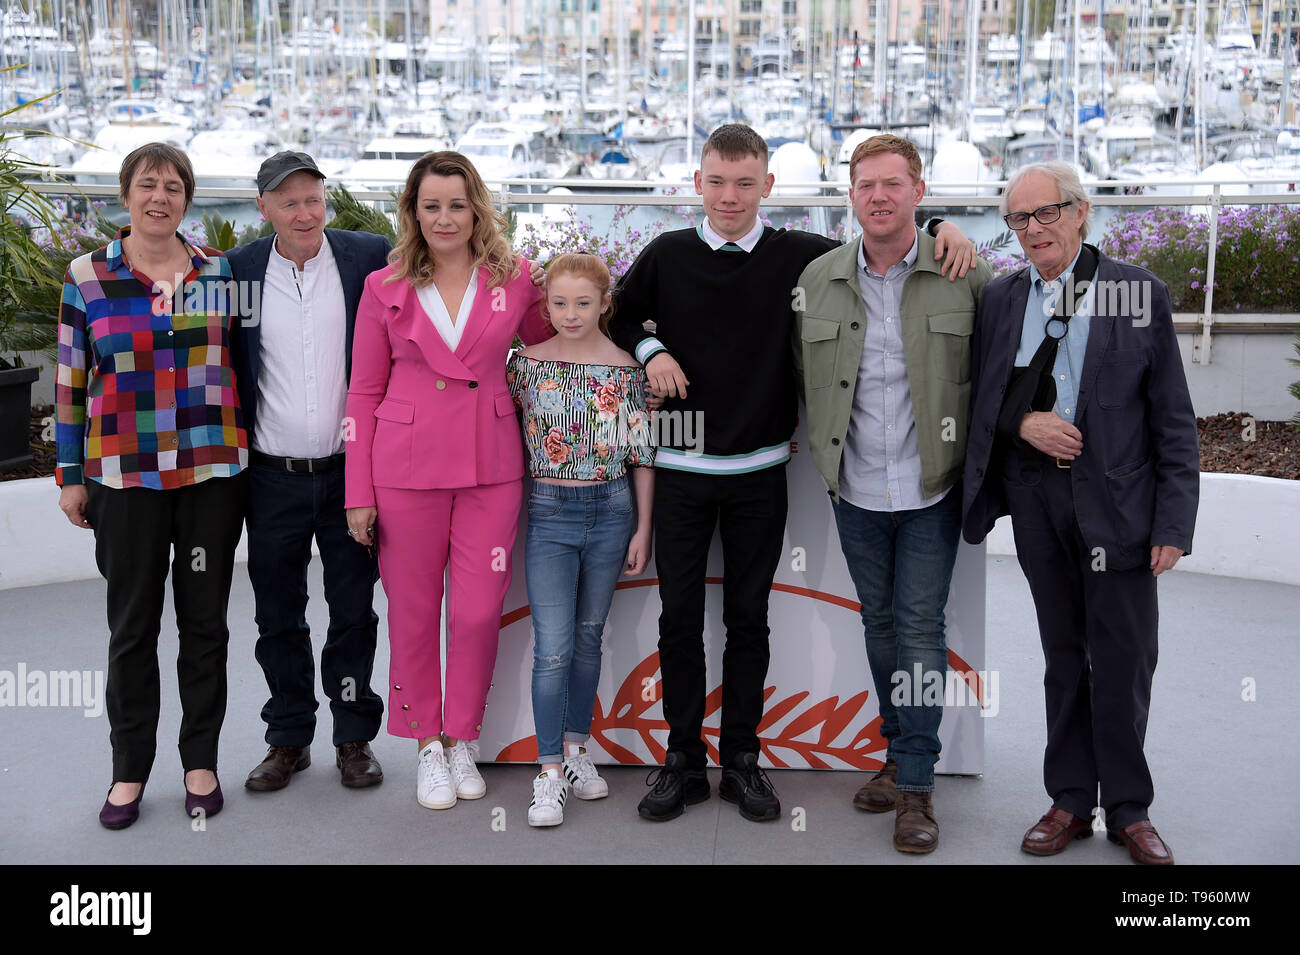 Cannes, France. 17th May, 2019. 72nd Cannes Film Festival 2019, Photocall film : Sorry, we missed you Pictured: Ken Loach, Kris Hitchen, Debbie Honeywood, Rhys Stone, Katie Proctor, Paul Laverty, Rebecca O'Brien Credit: Independent Photo Agency/Alamy Live News Stock Photo